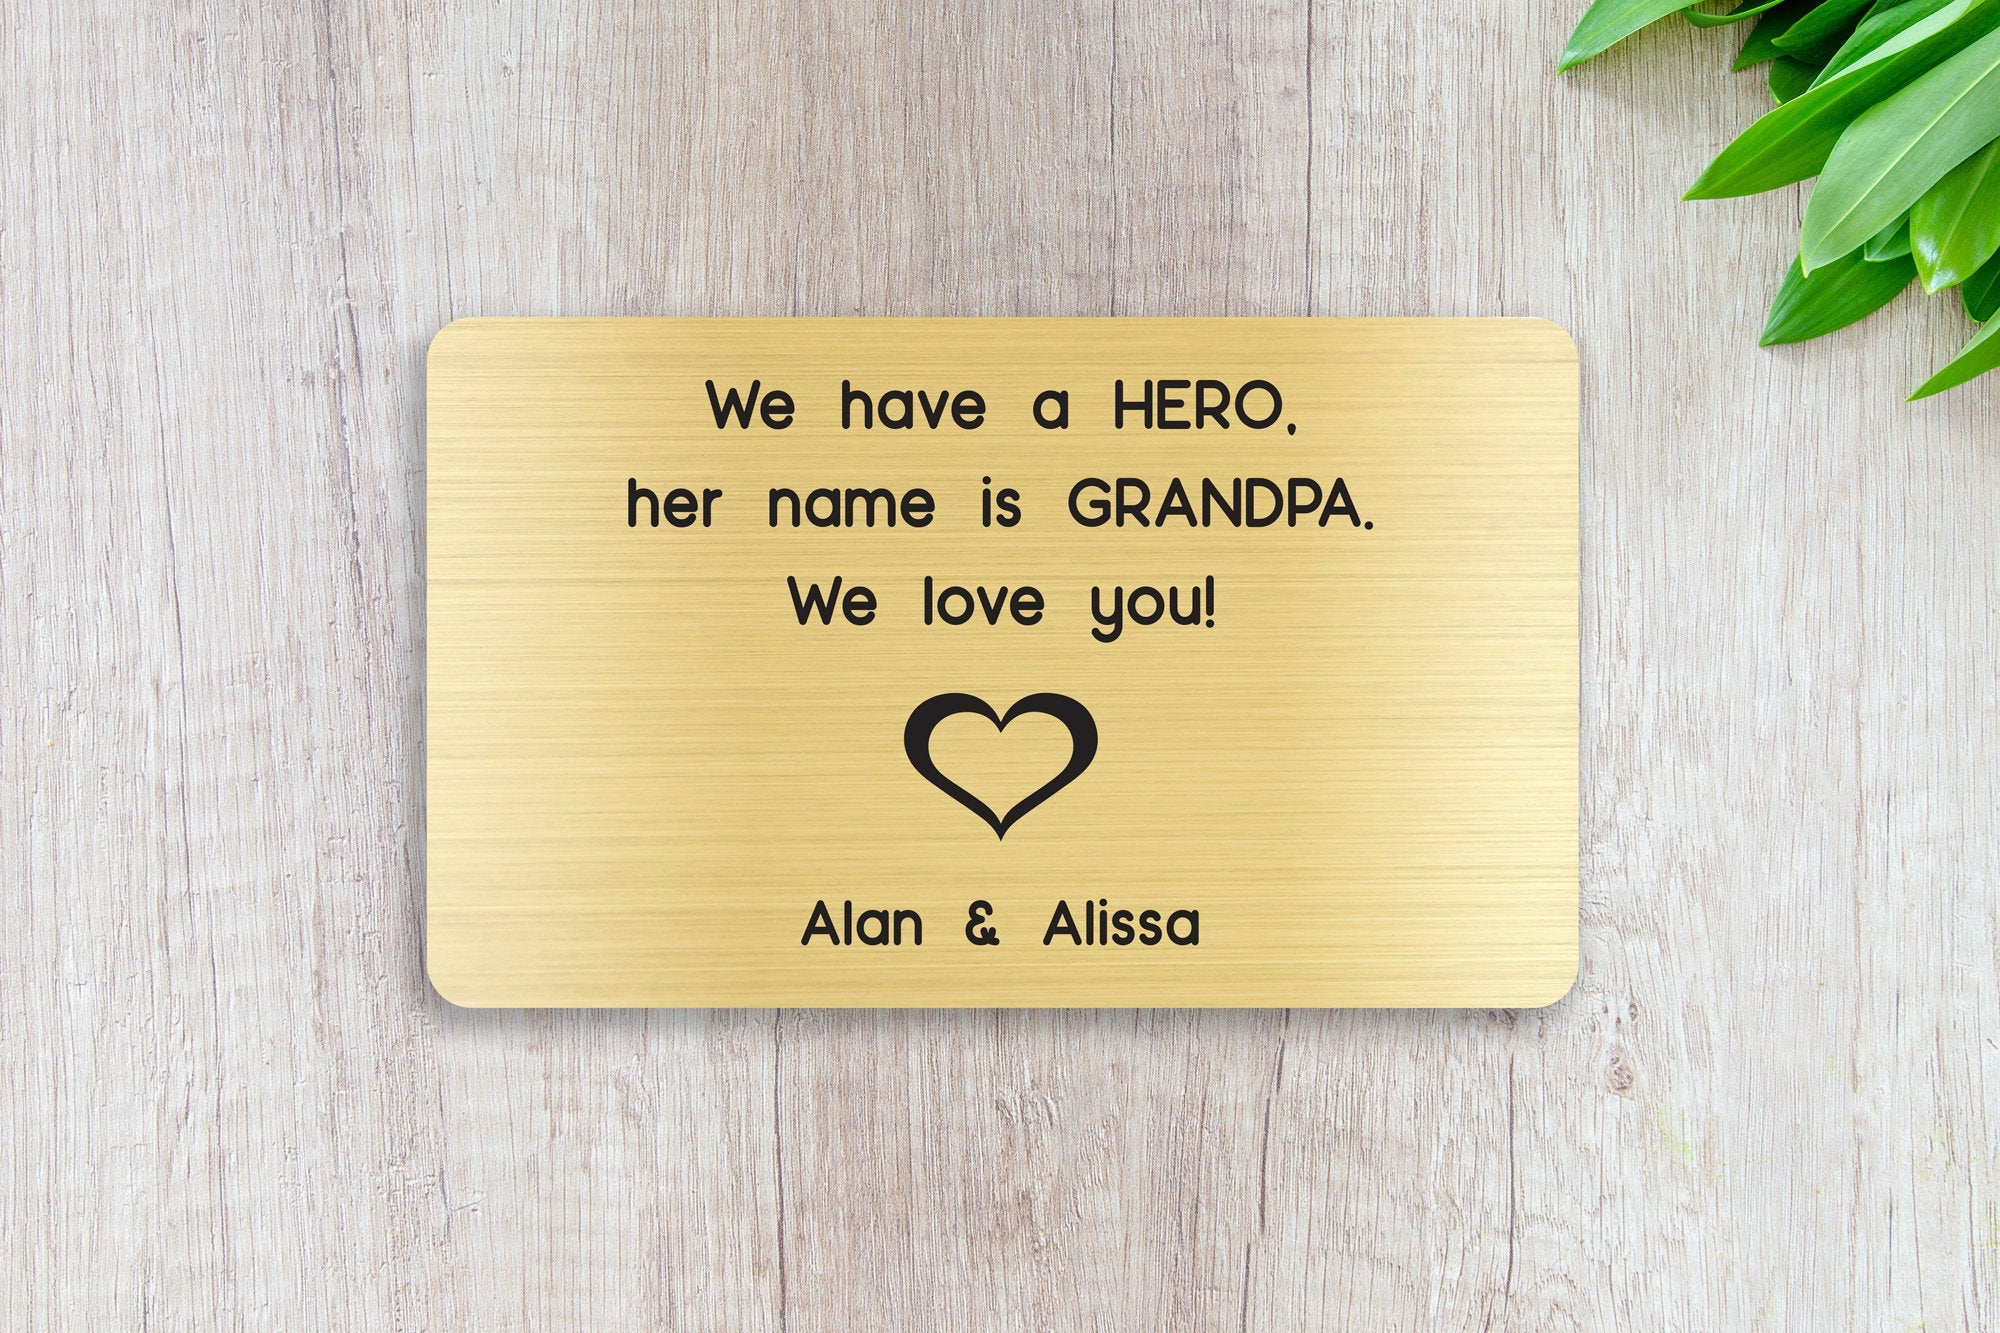 Personalized Engraved Wallet Card Insert, Gift for Grandpa, Hero, From the Grand kids, Gold